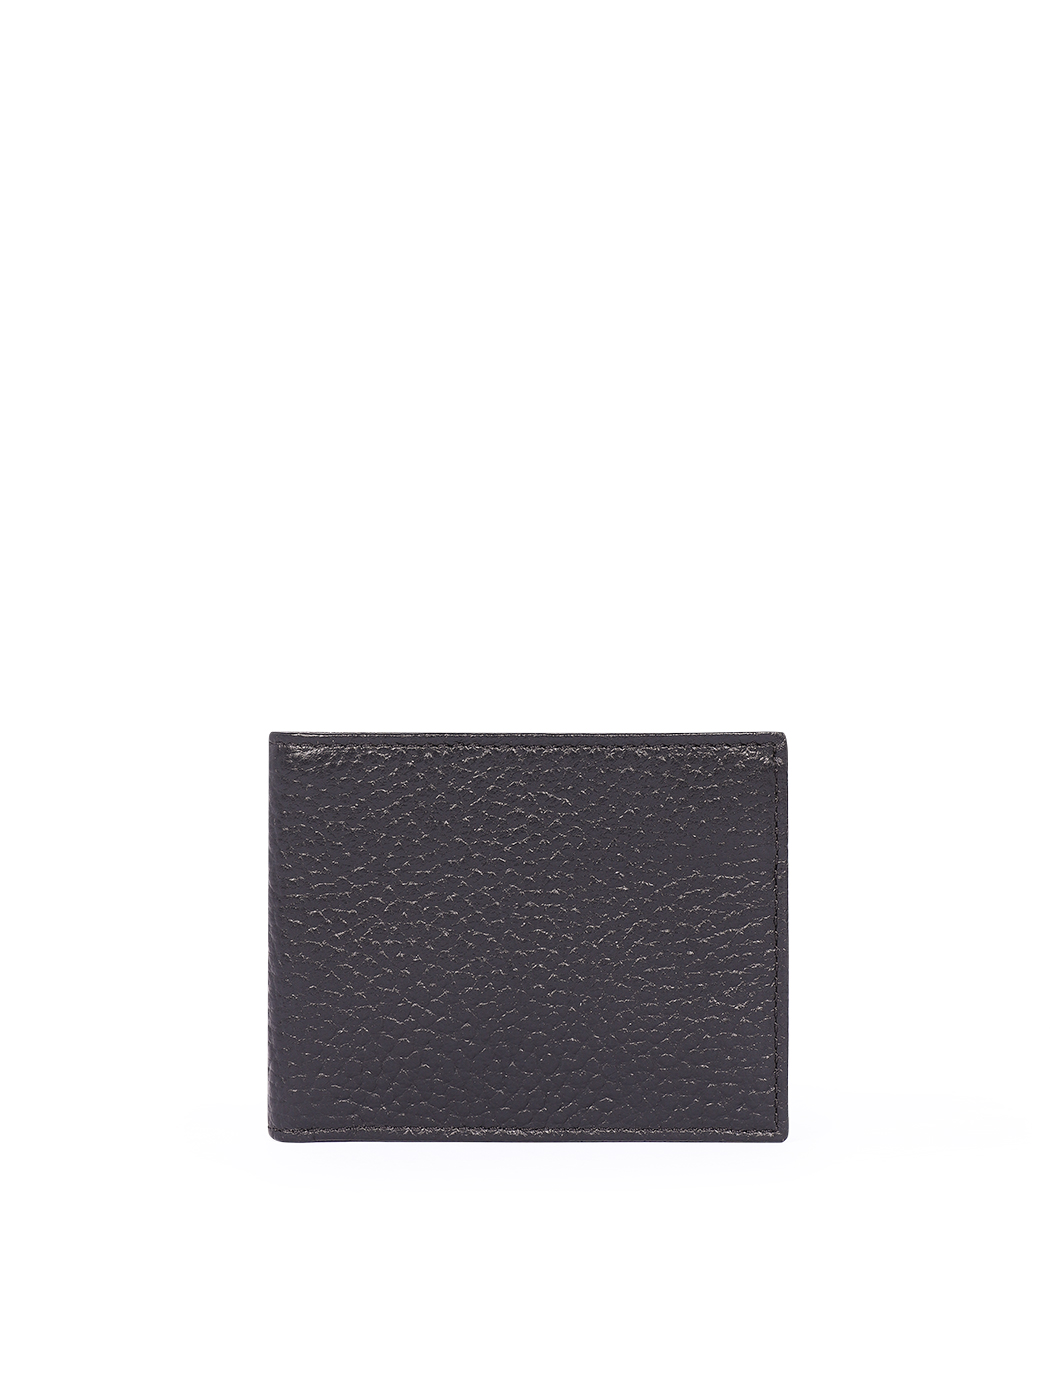 Billfold Leather Wallet with Coin Pocket Black